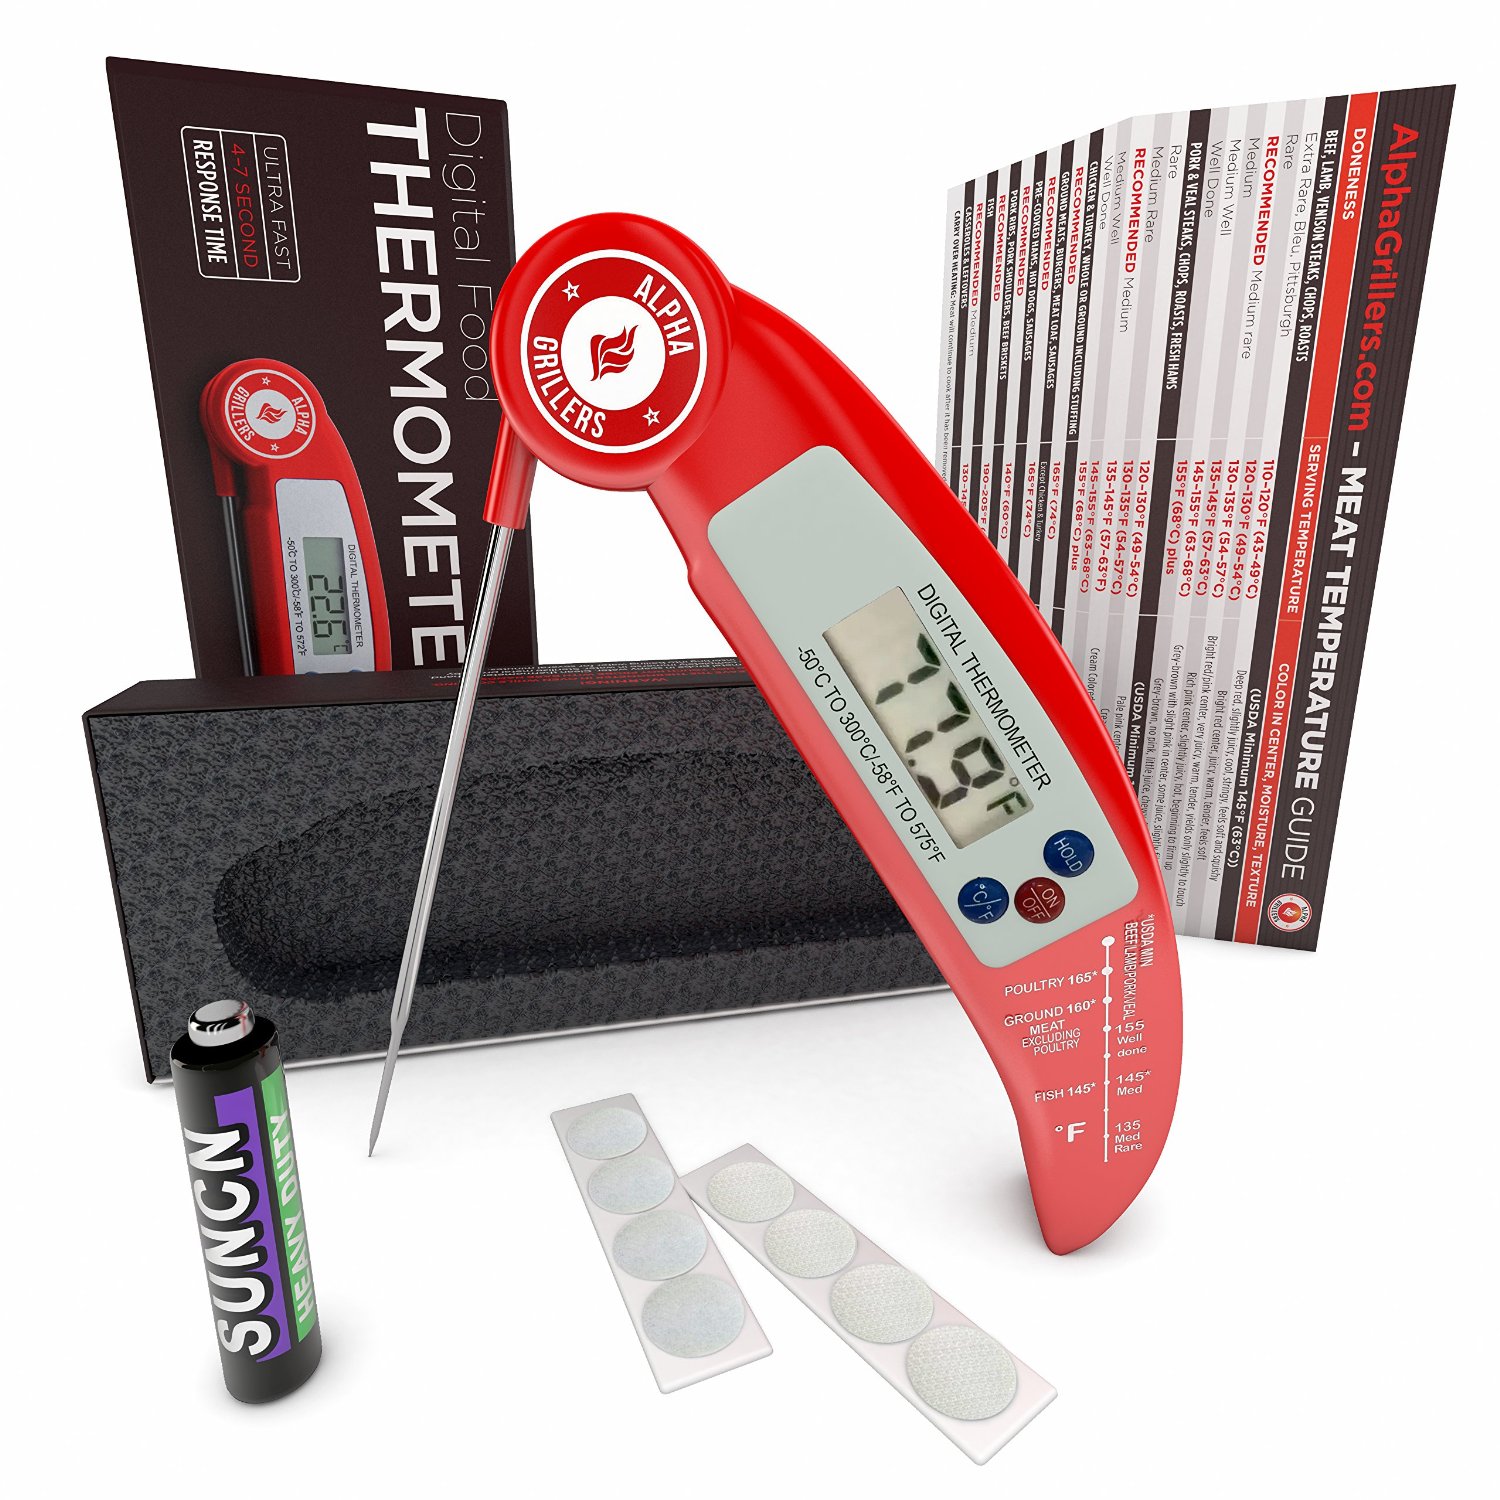 Electronic Thermometer Giveaway